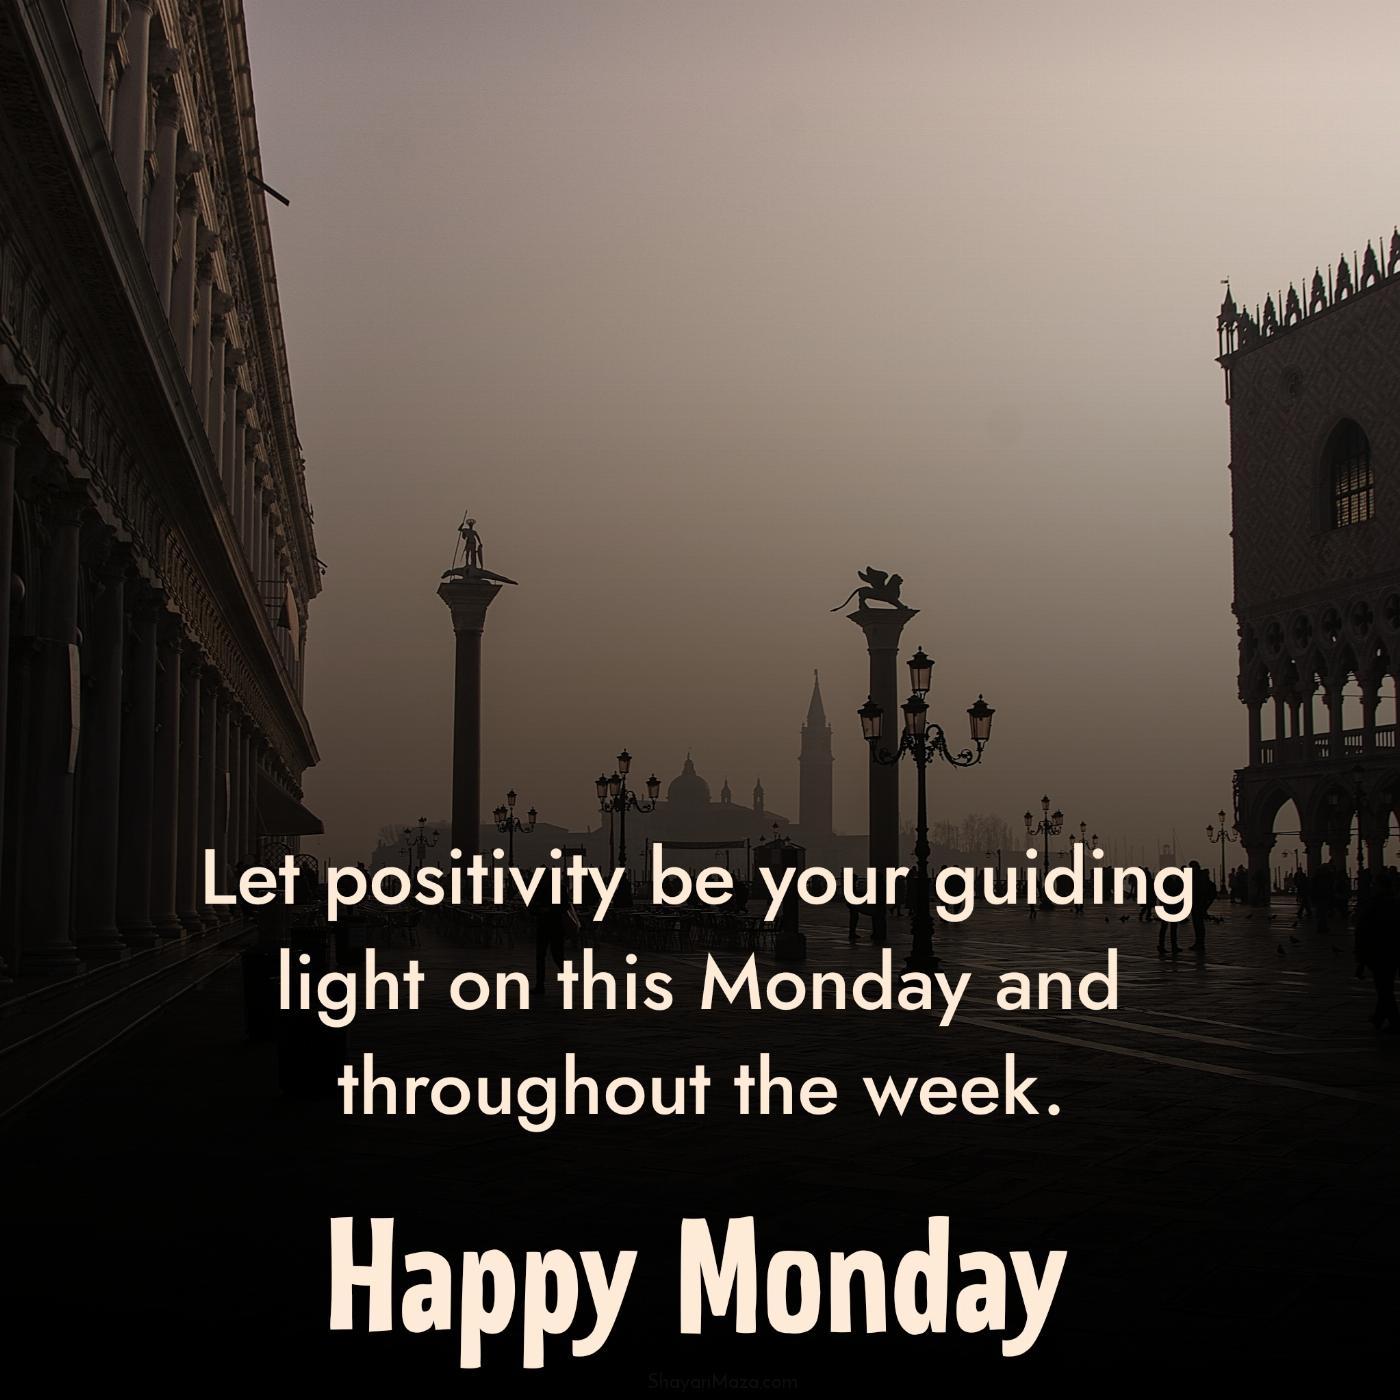 Let positivity be your guiding light on this Monday